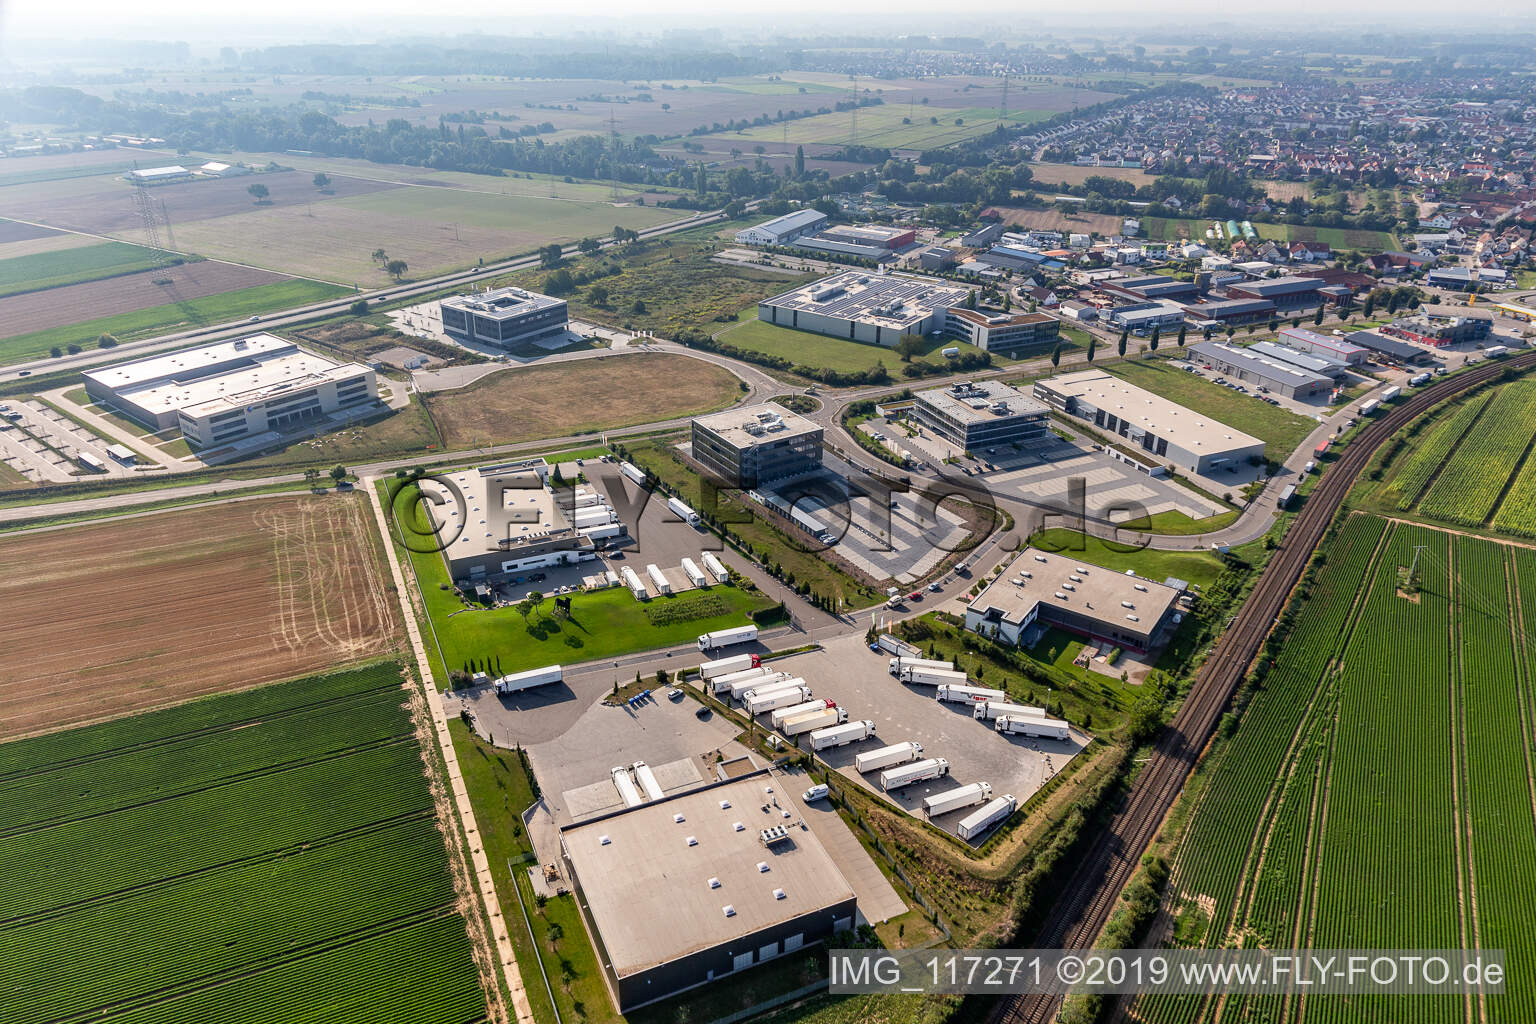 North industrial area in Rülzheim in the state Rhineland-Palatinate, Germany seen from a drone